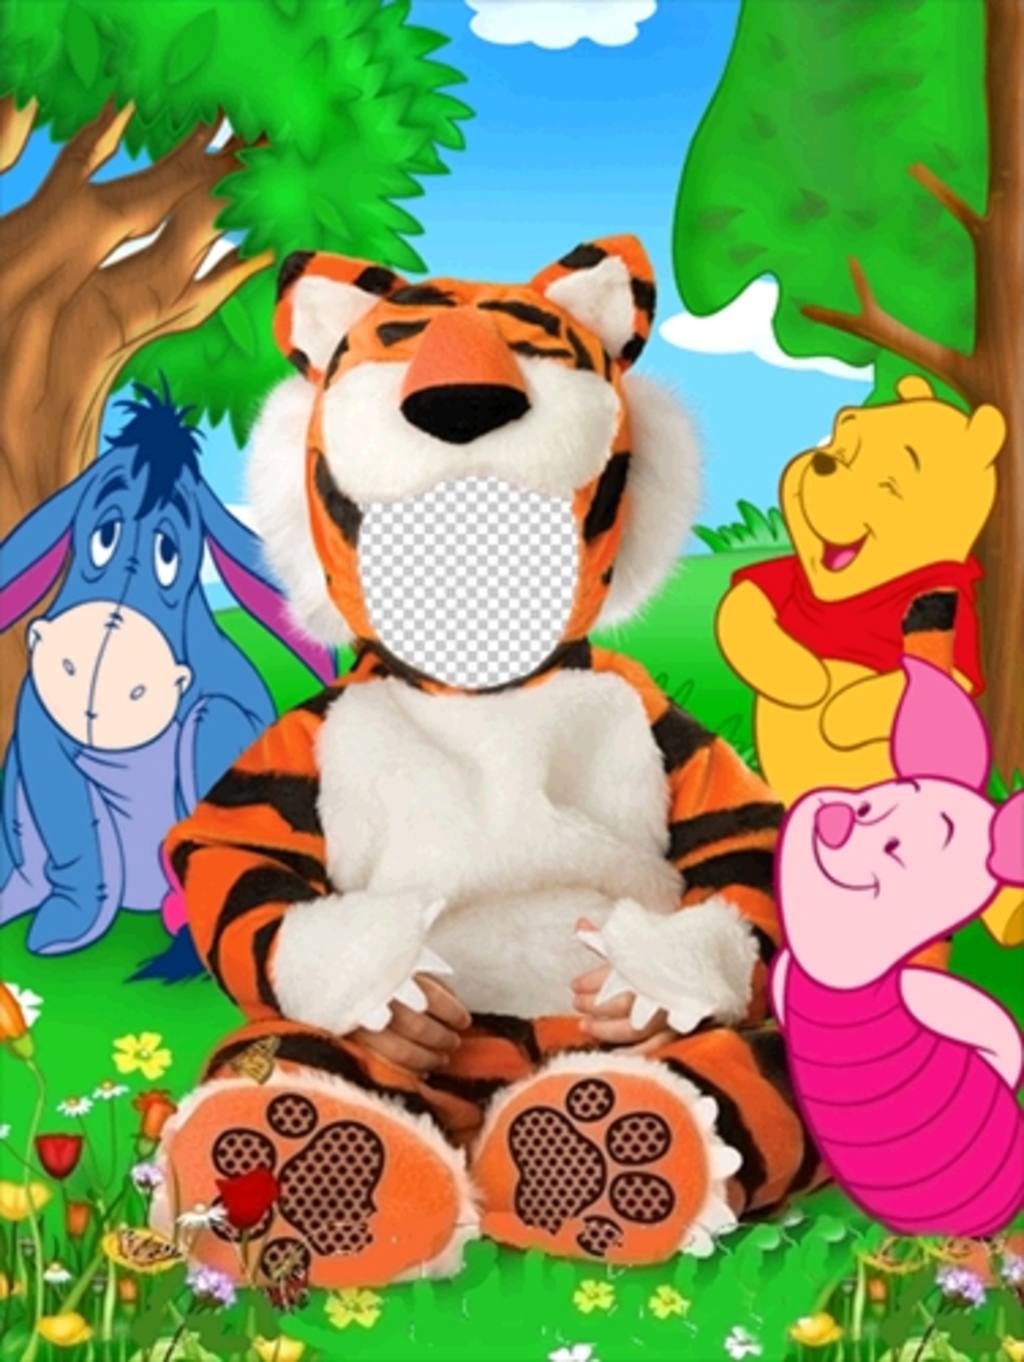 Virtual tiger costume for children that you can edit with your photo ..